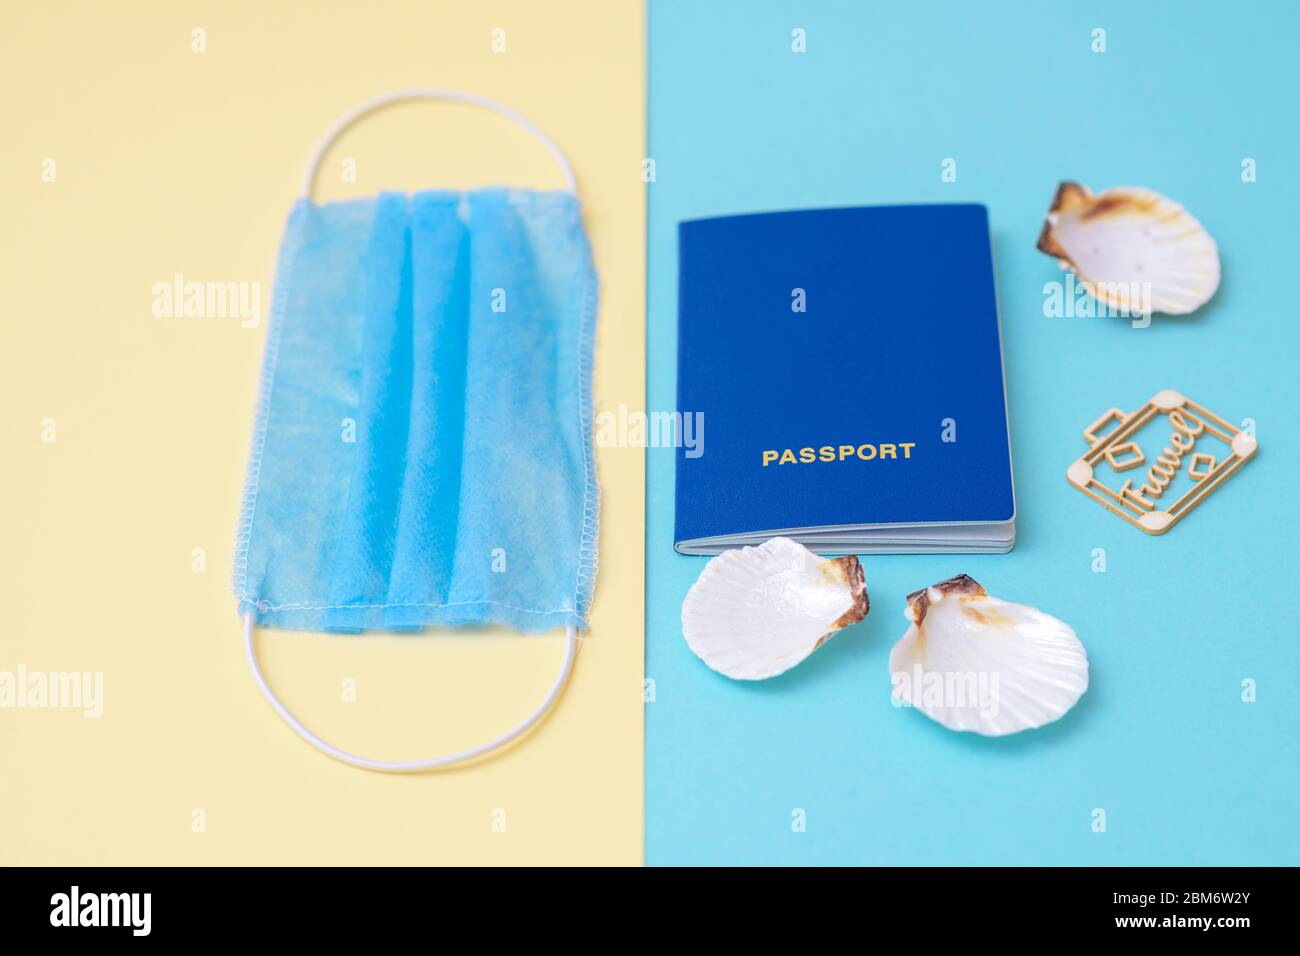 Travel concept during coronavirus. Travel and flight still life concept with a passport, medical mask and seashells on a blue and yellow background. Selective focus. Stock Photo